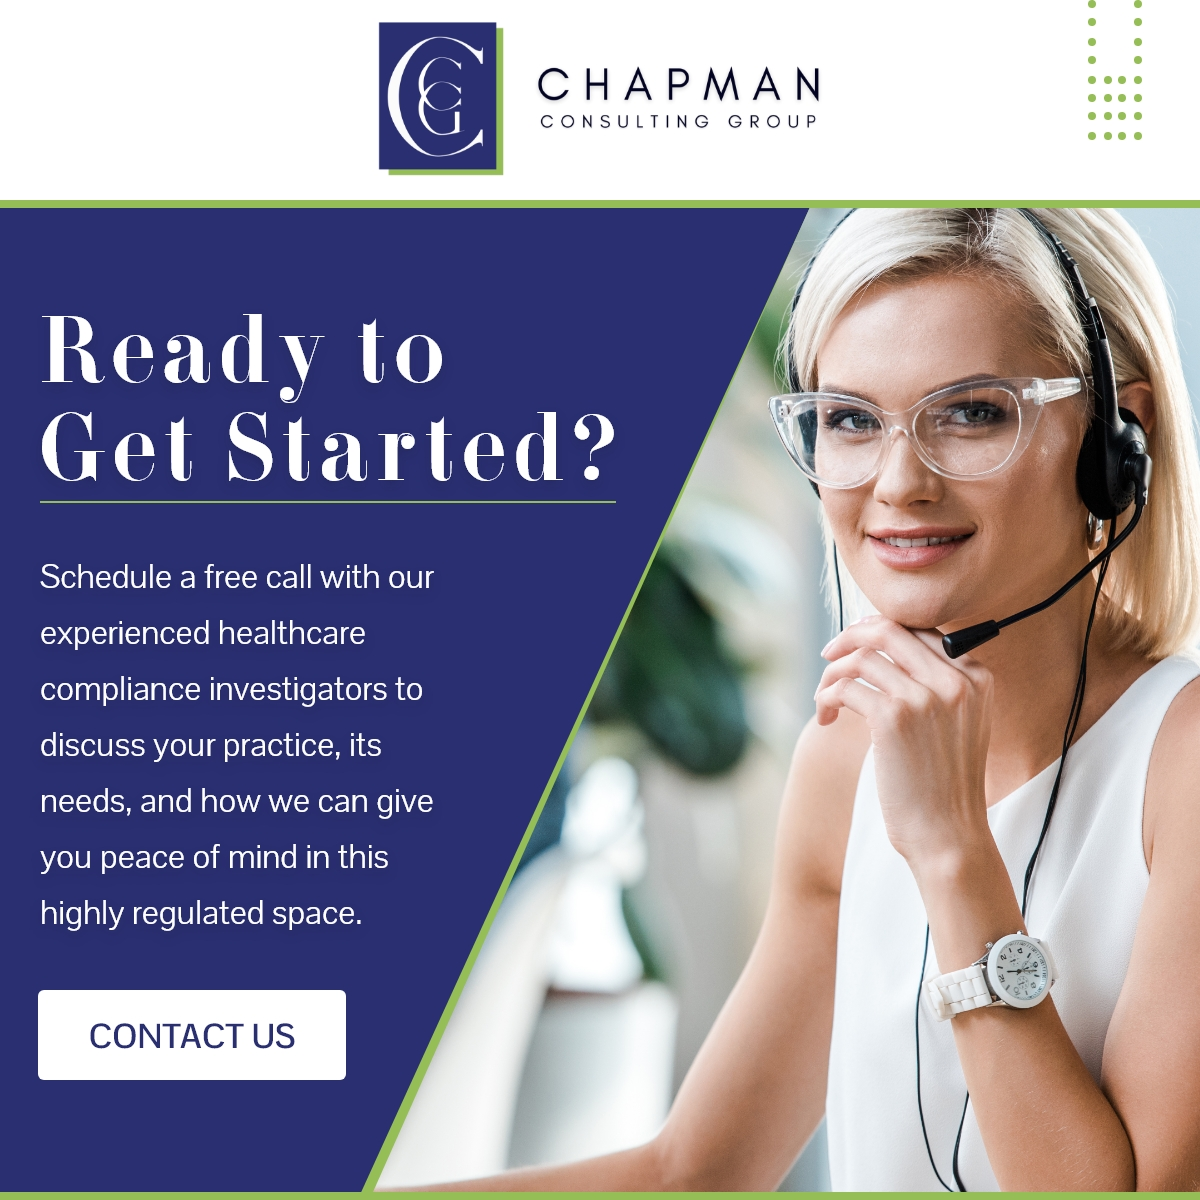 Chapman Consulting Group'